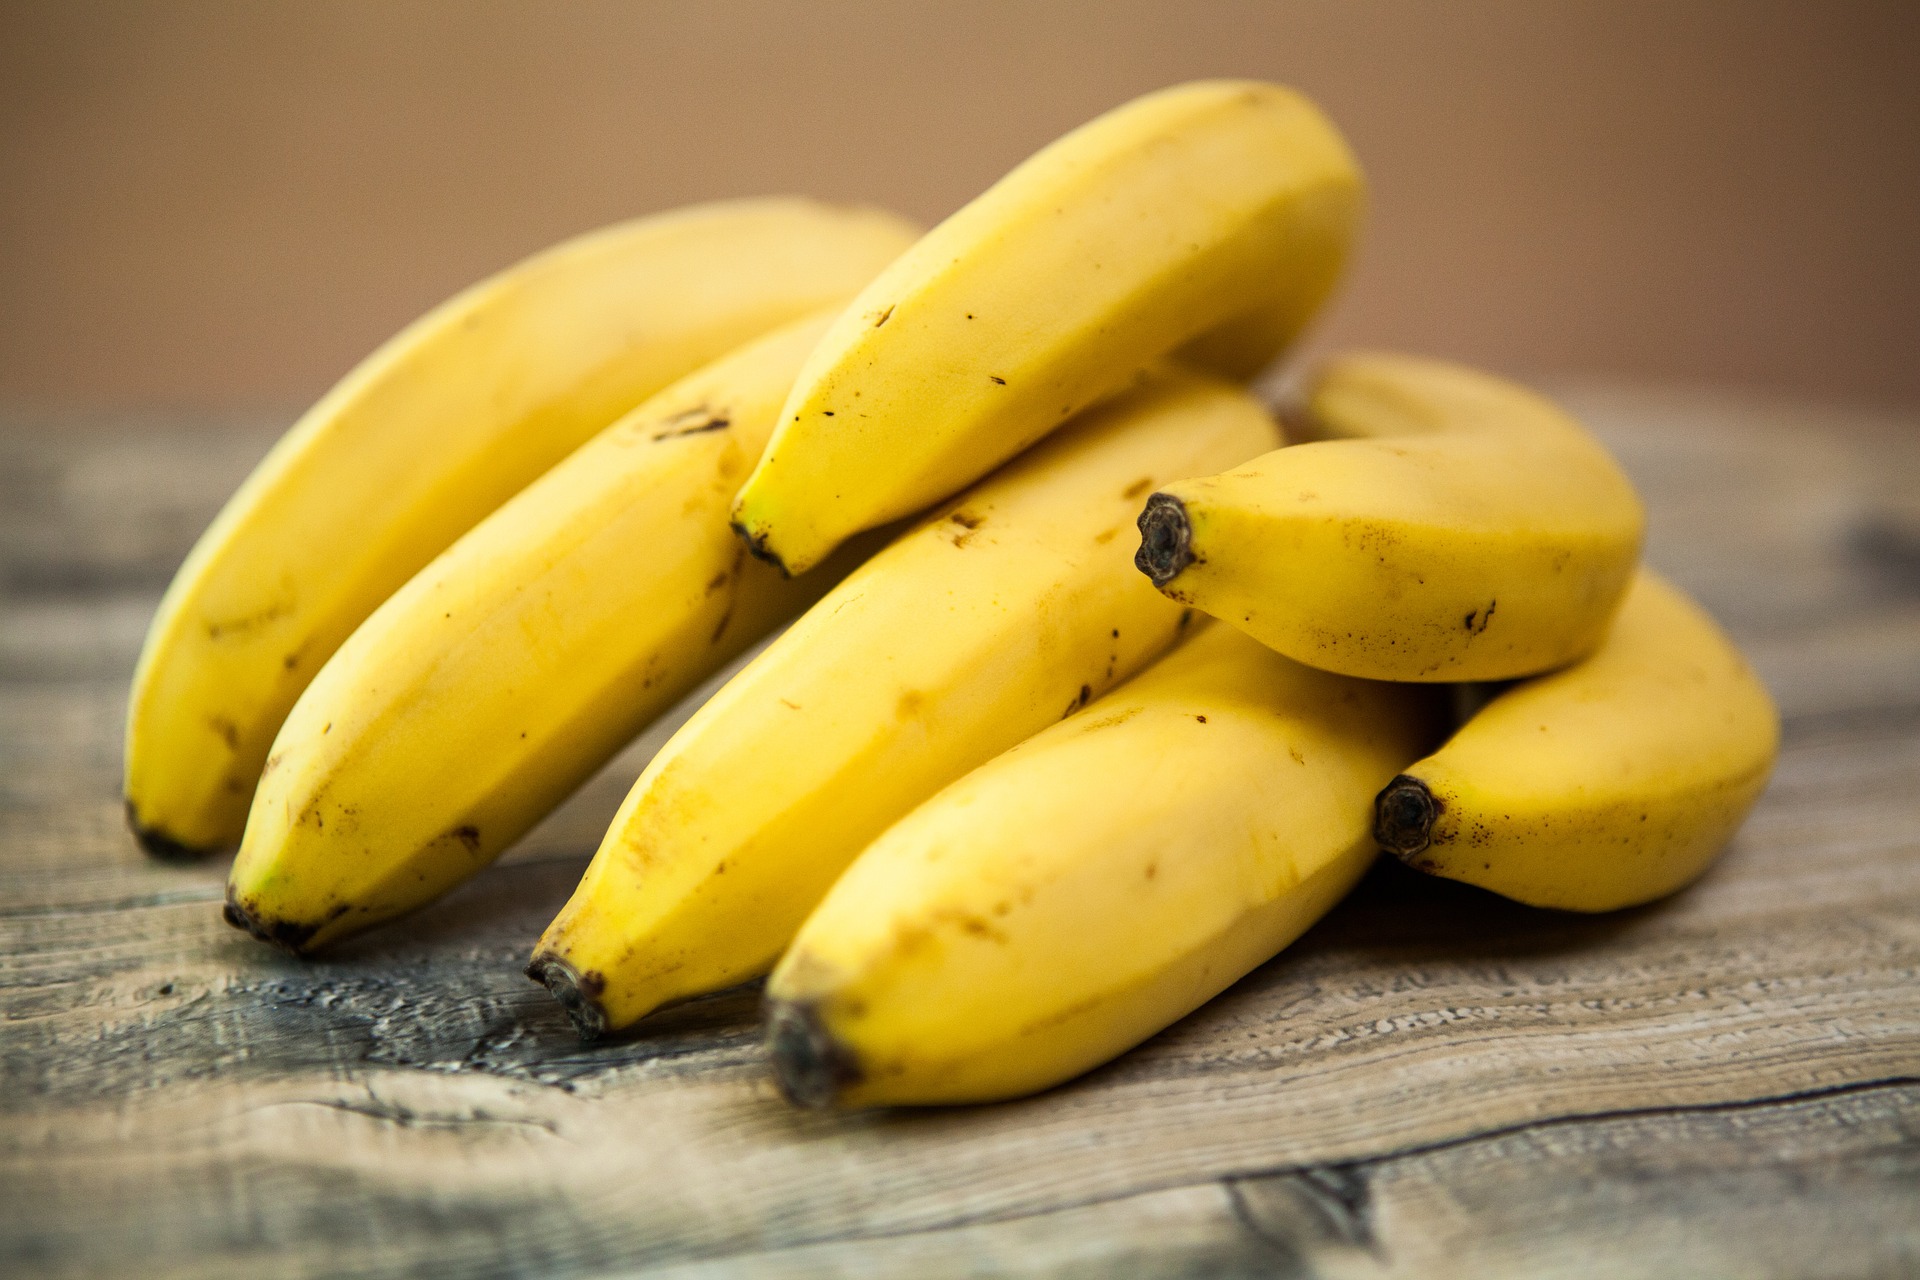 The basis of an easy diet - A Bunch of Seven Yellow Bananas laying on a cloth with a realistic wooden texture.